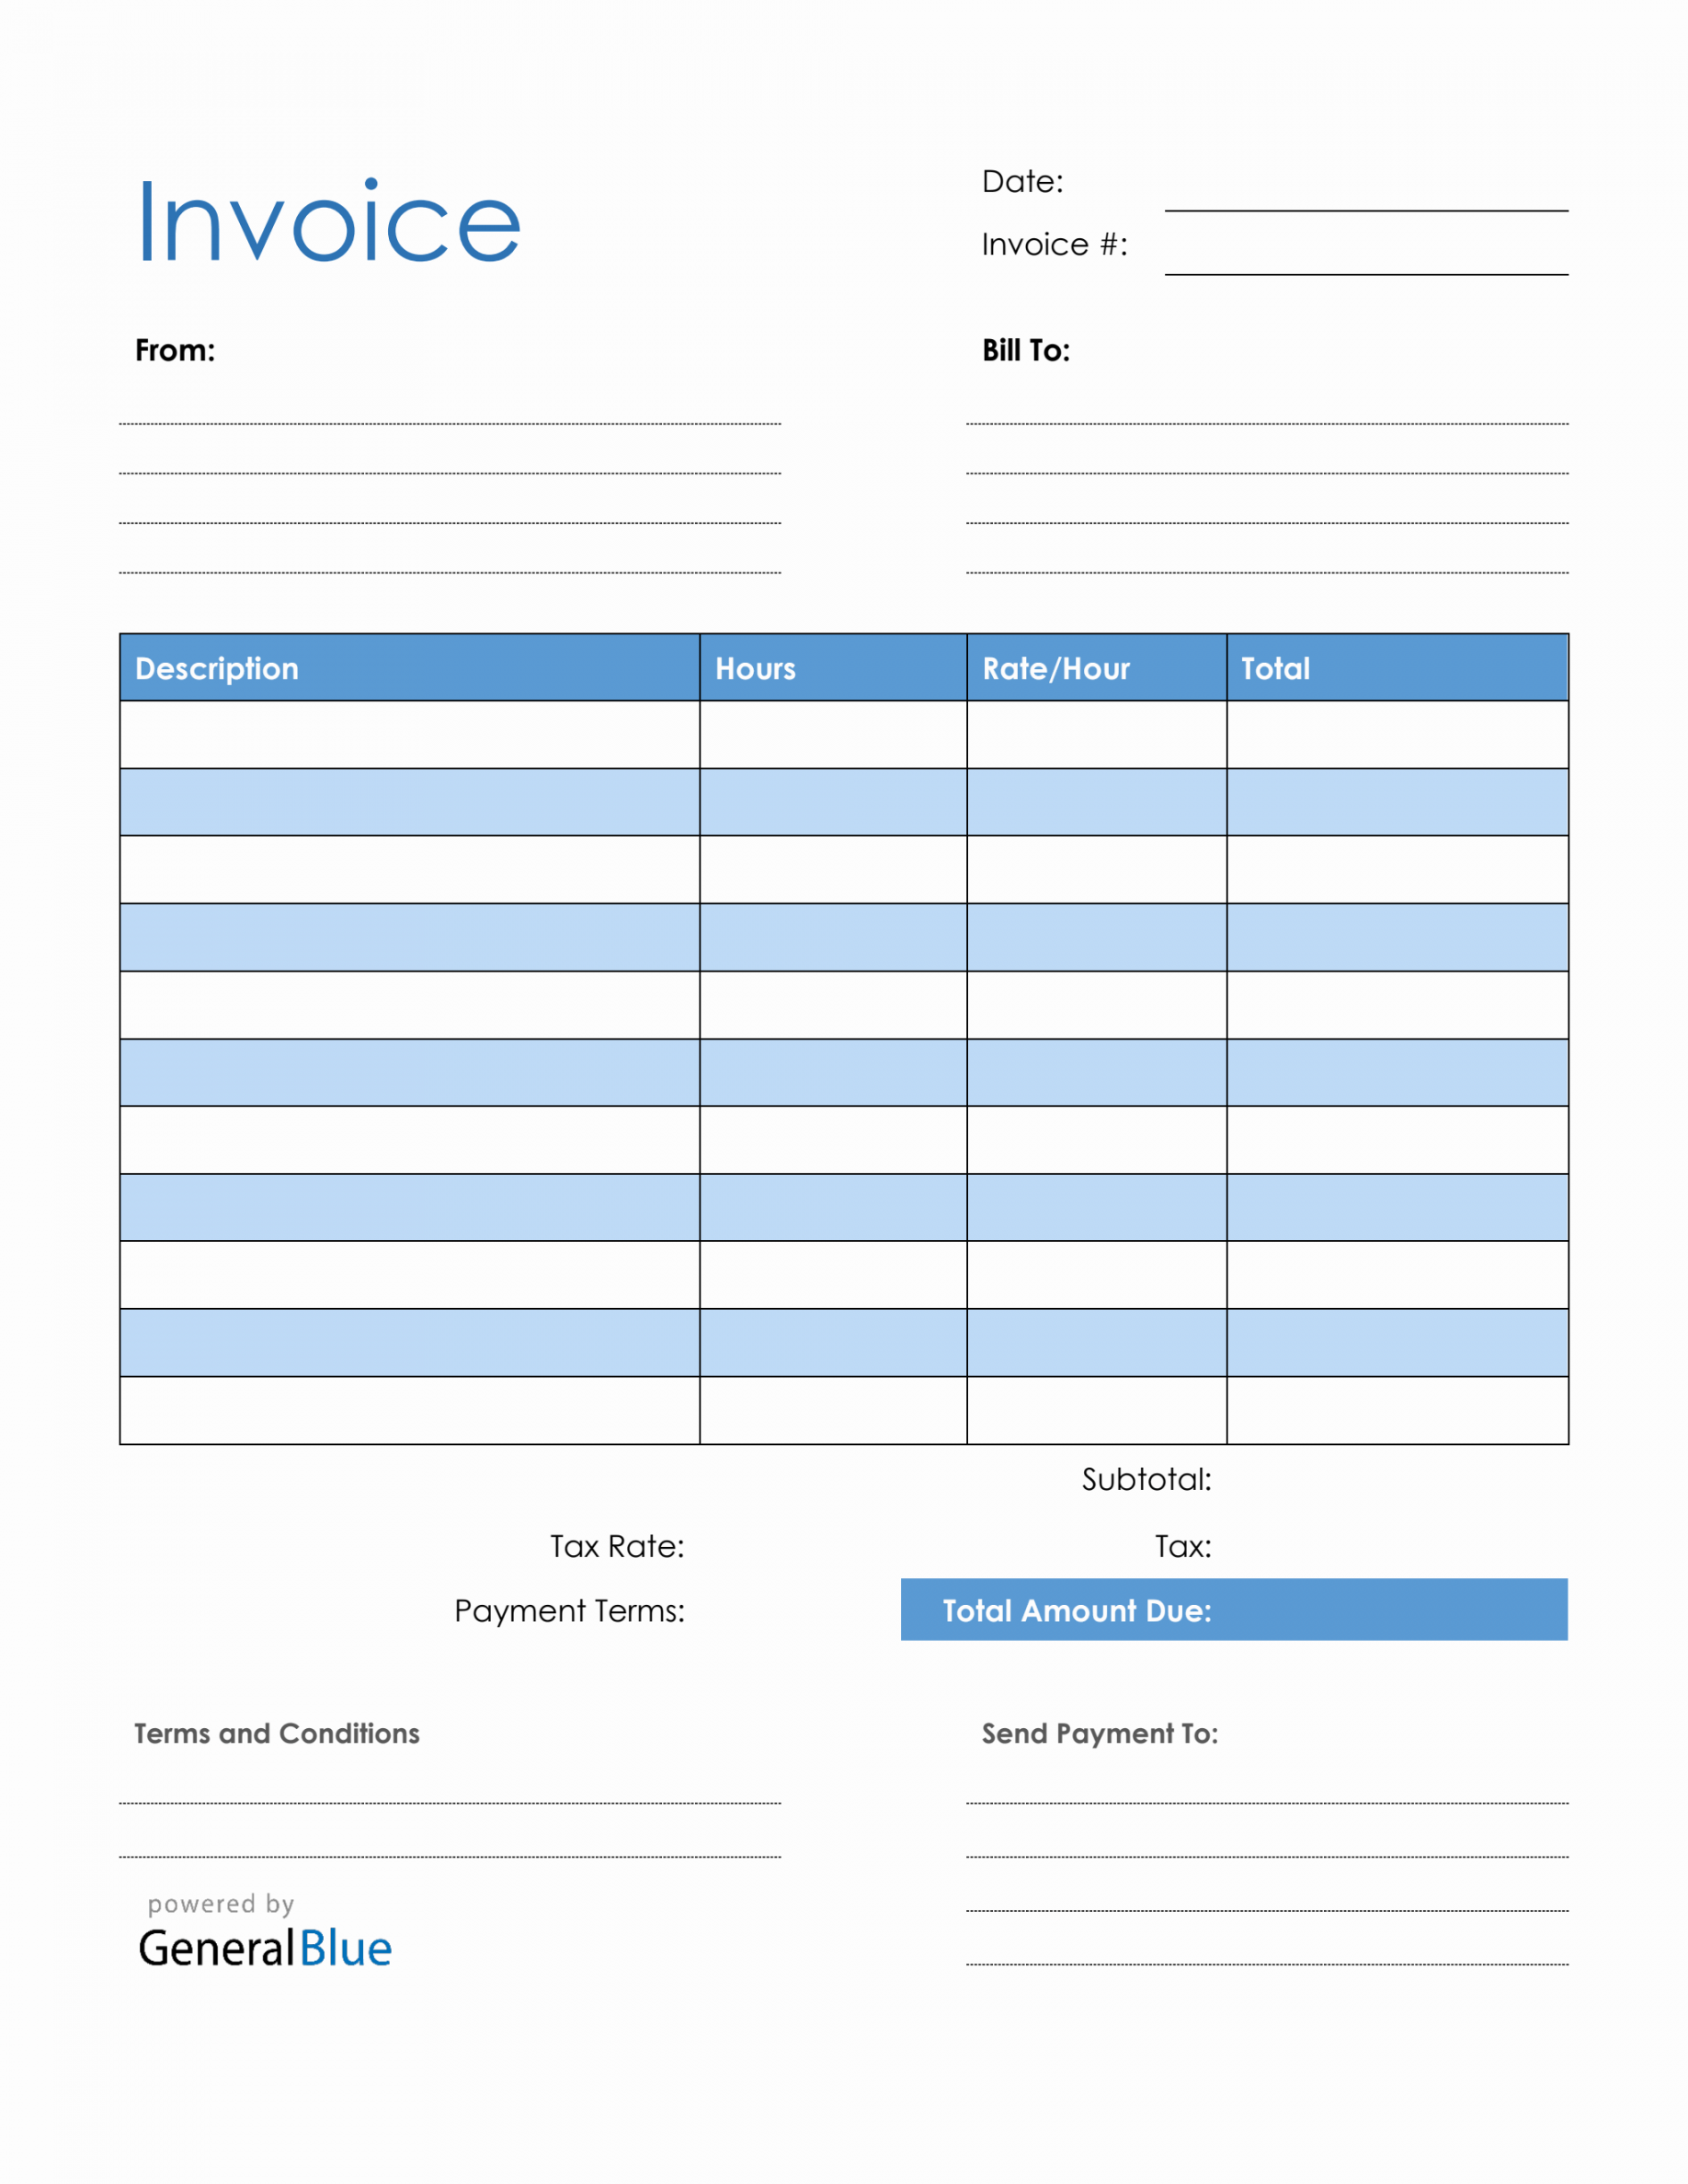 Invoice Template Free Printable - Printable - Blank Invoice Template in PDF Blue